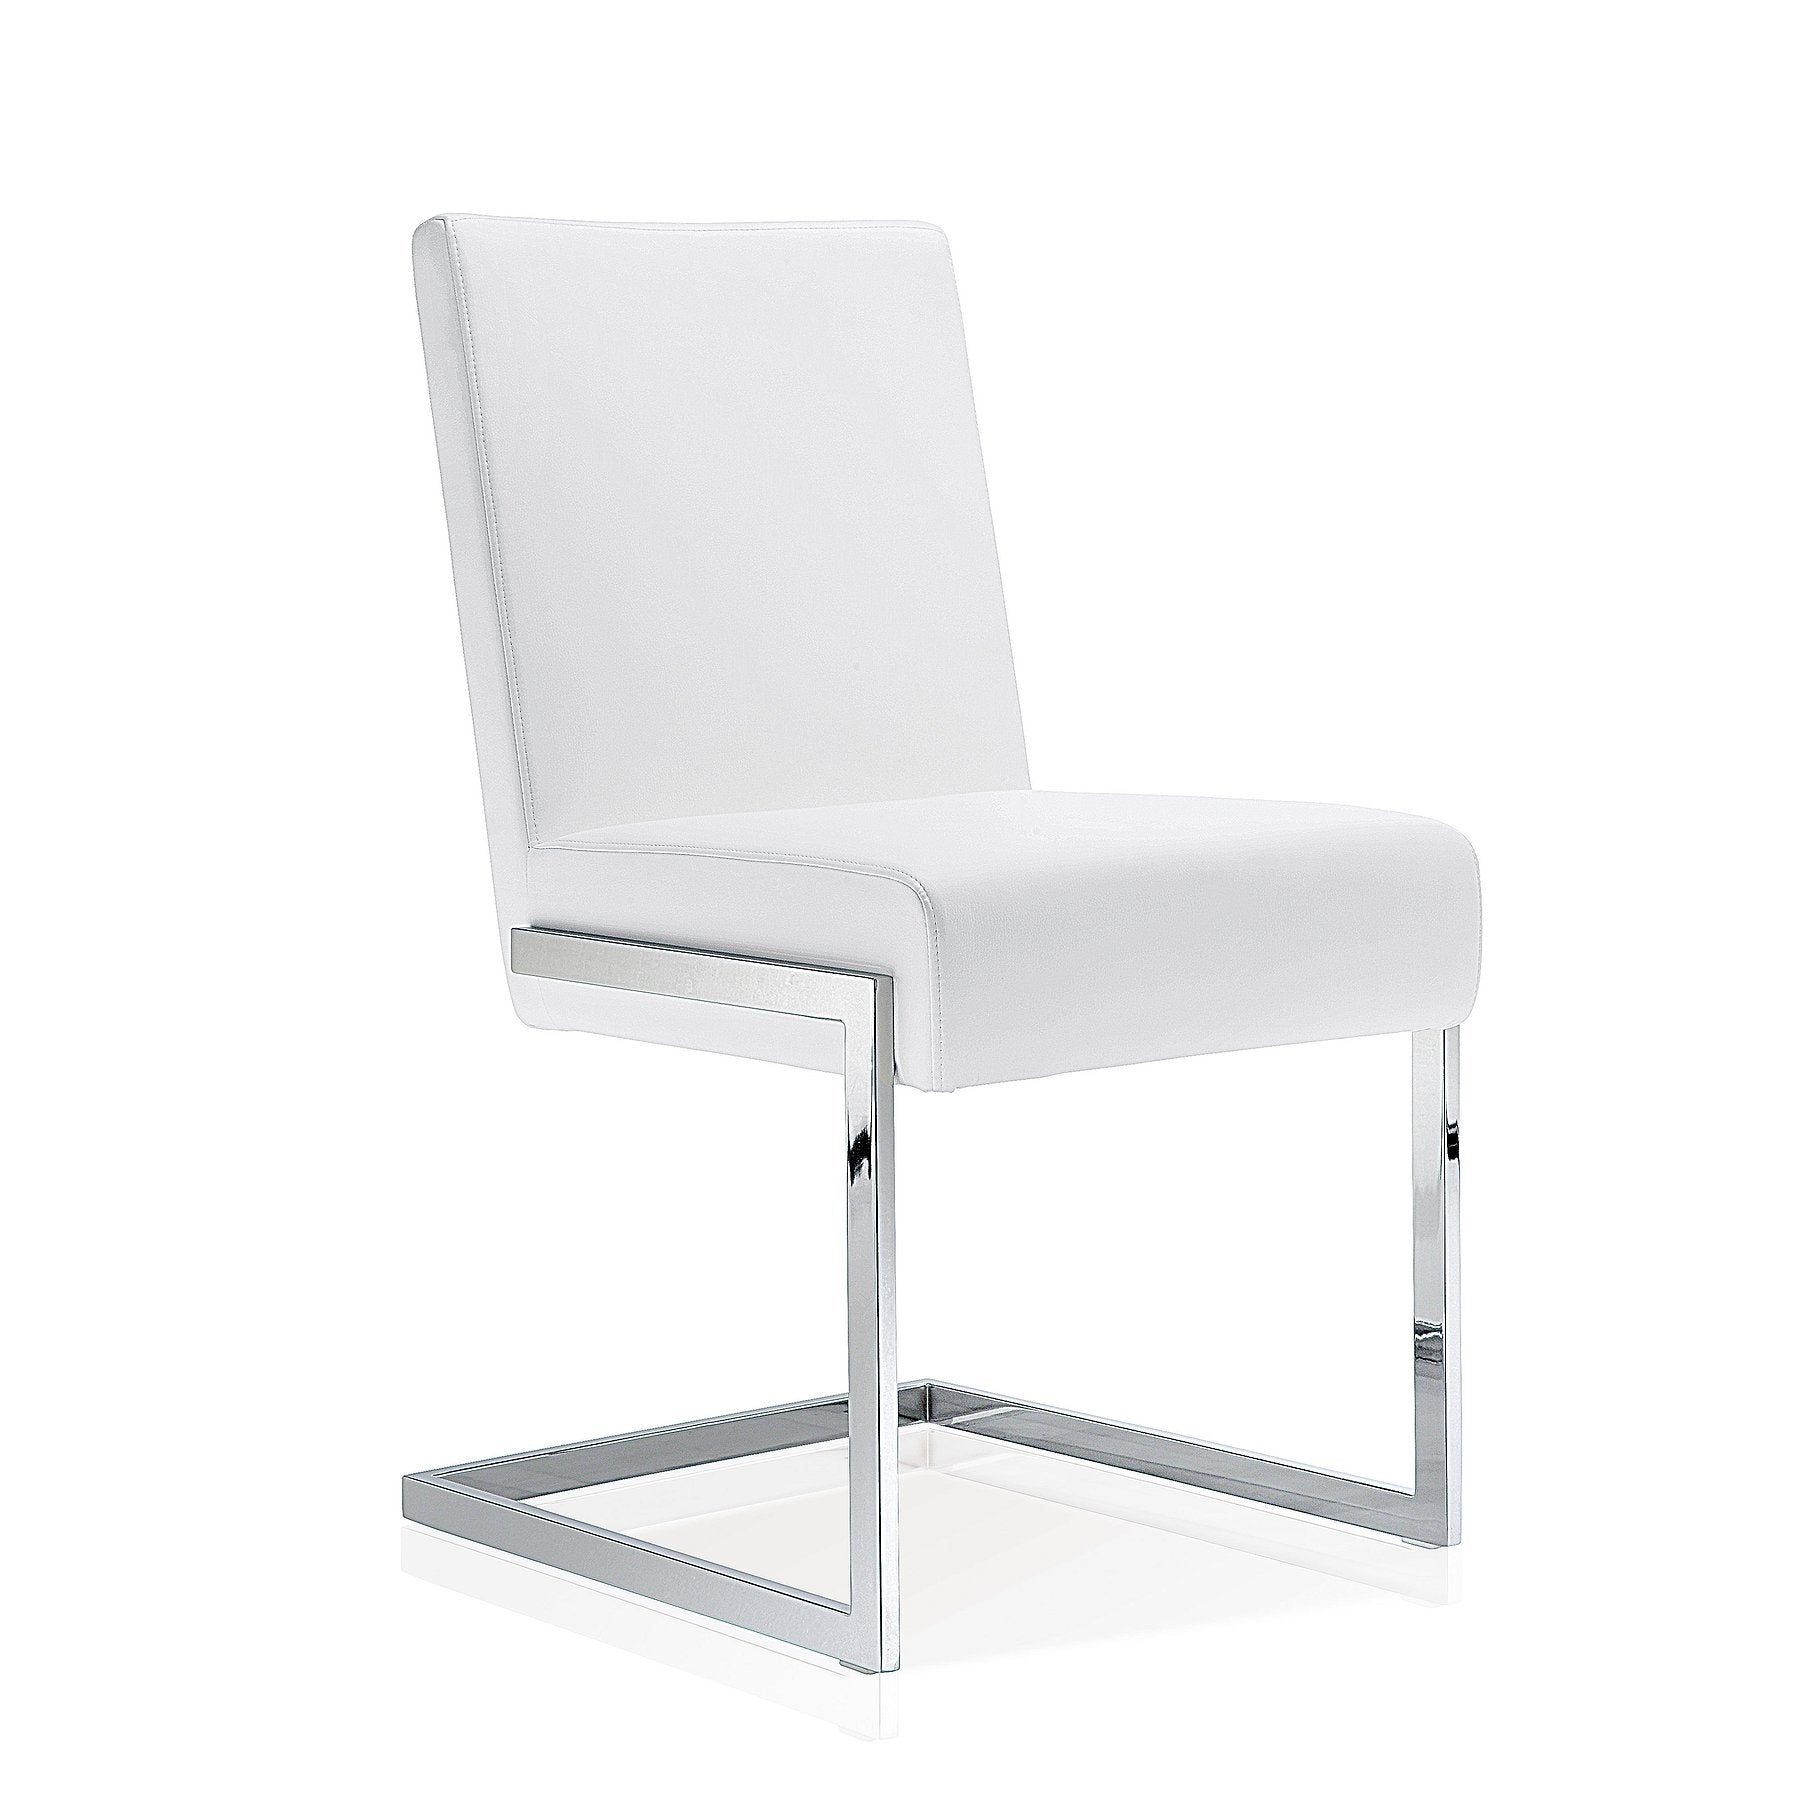 SEF313126 abby - dining chair - Dreamart Gallery